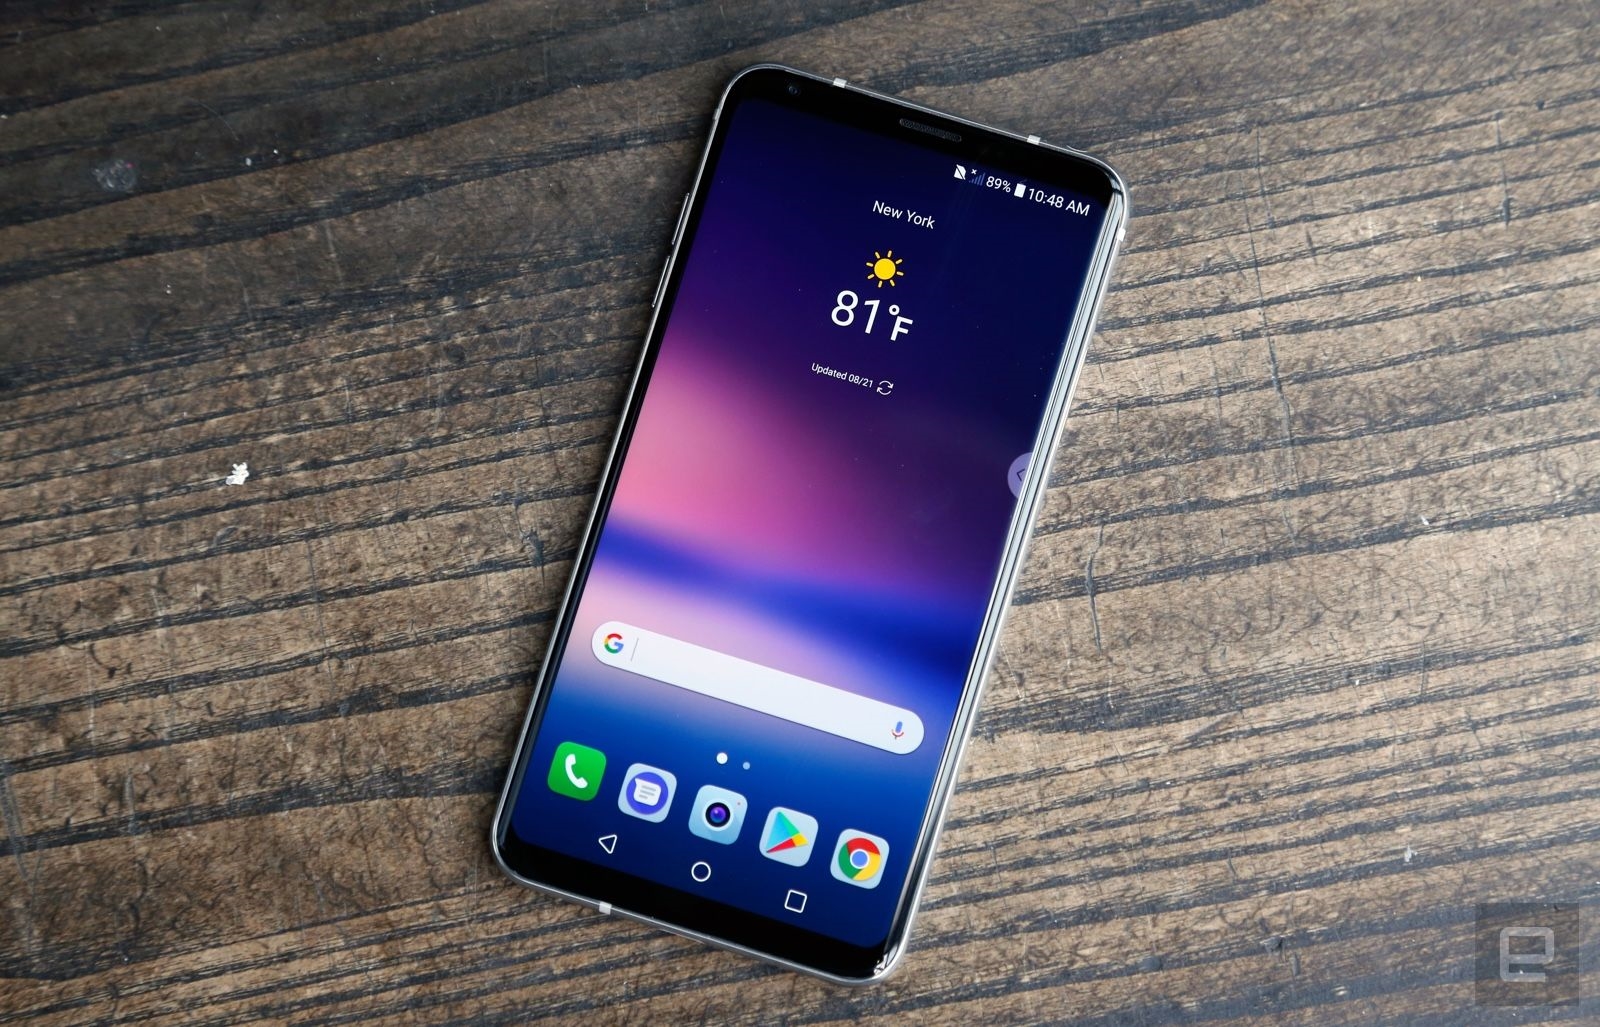 LG V30 hands-on: The phone the G6 should've been | DeviceDaily.com